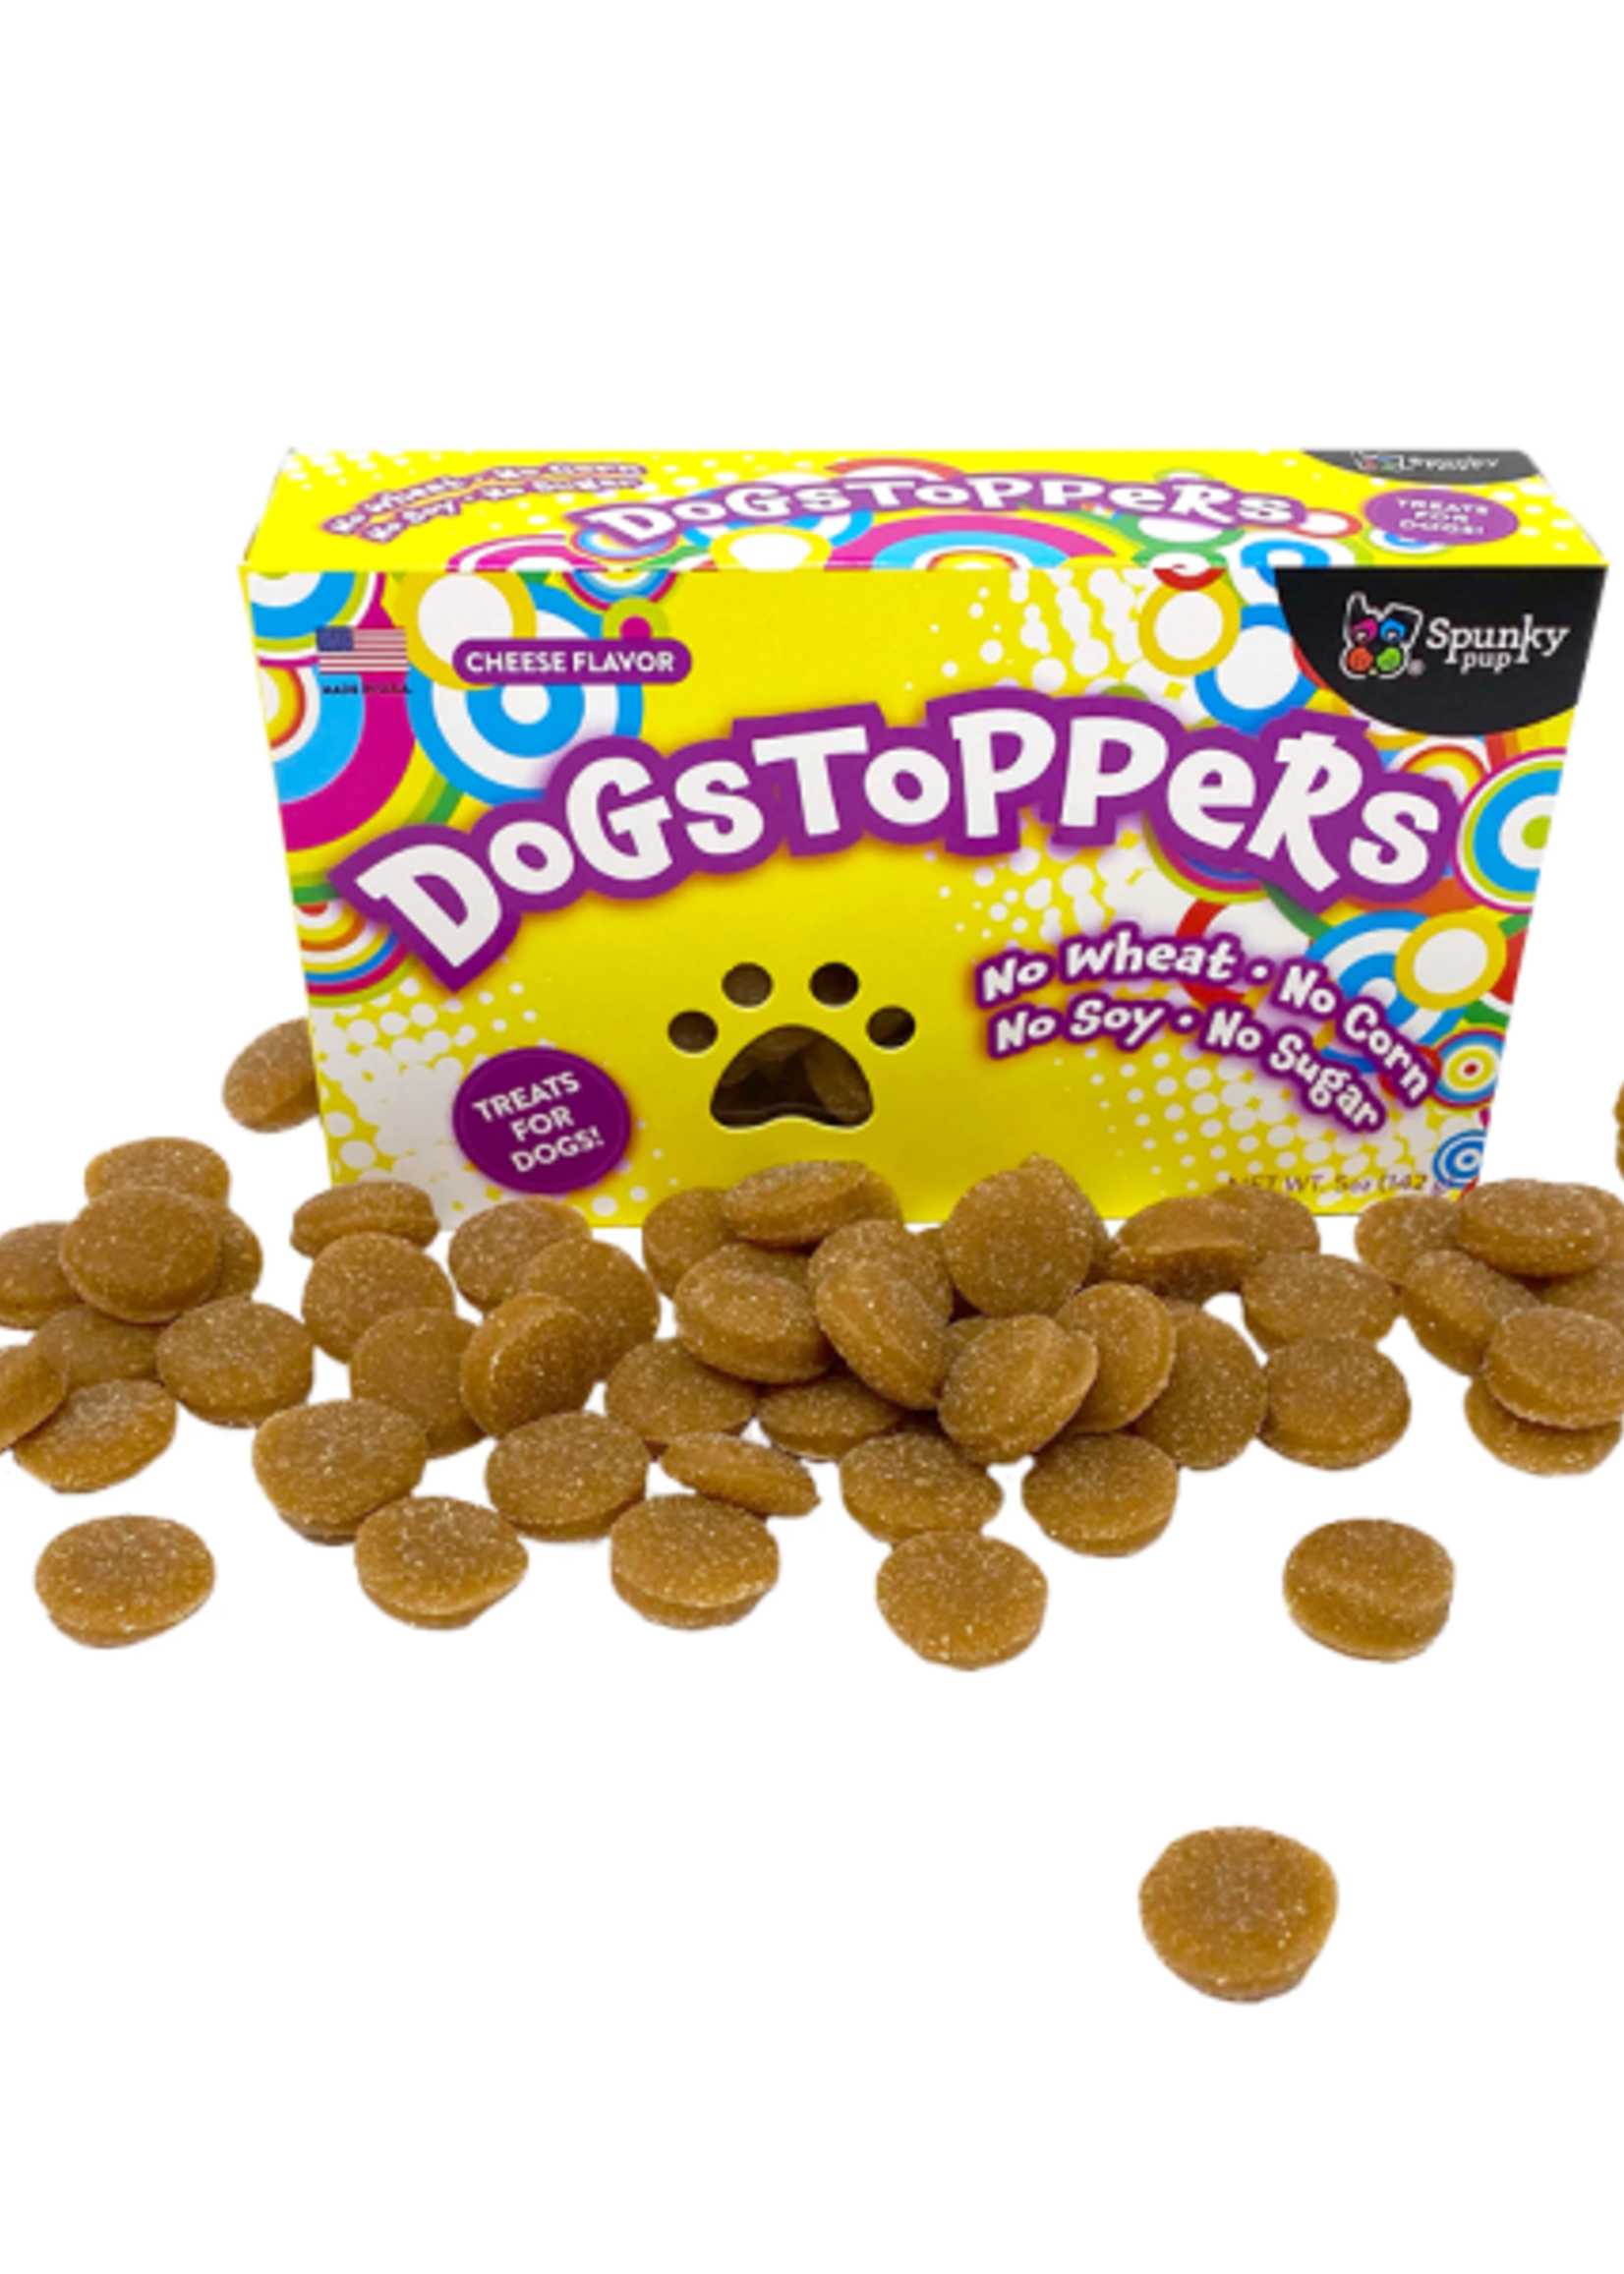 Spunky Pup Dogstoppers Treats Cheese Flavour 5oz